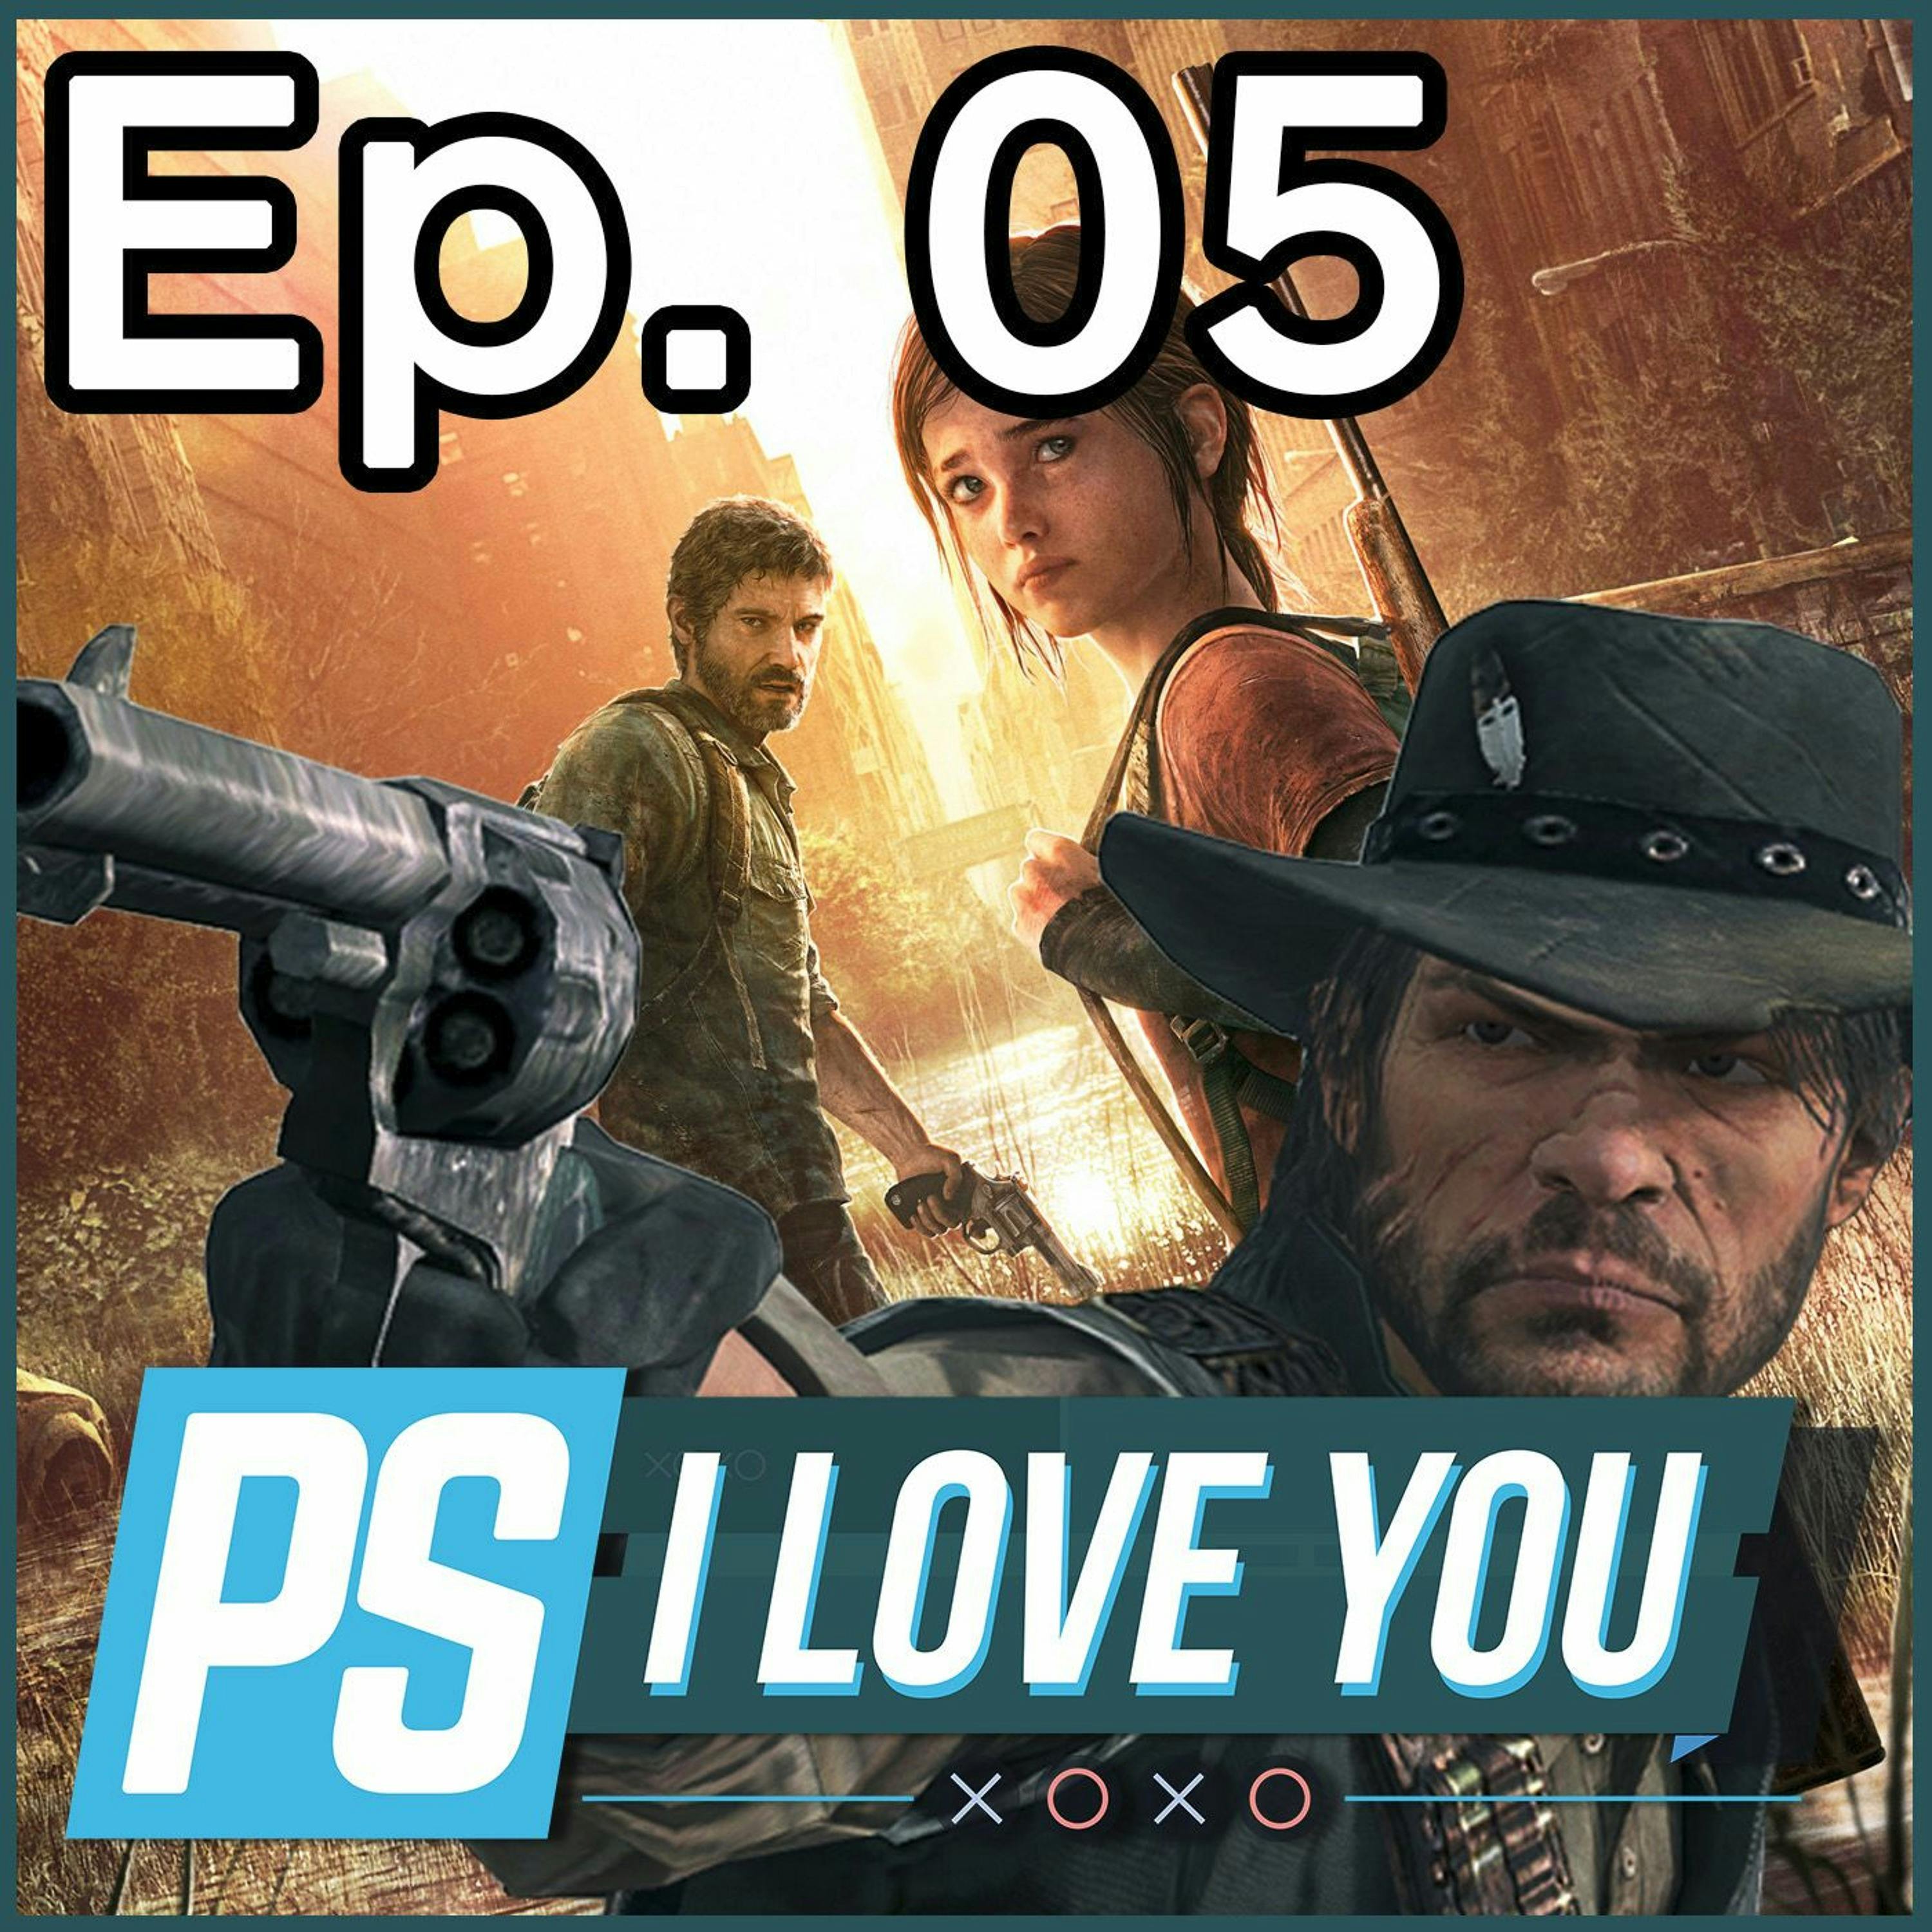 The Last of Us vs. Red Dead Redemption - PS I Love You XOXO Ep. 05